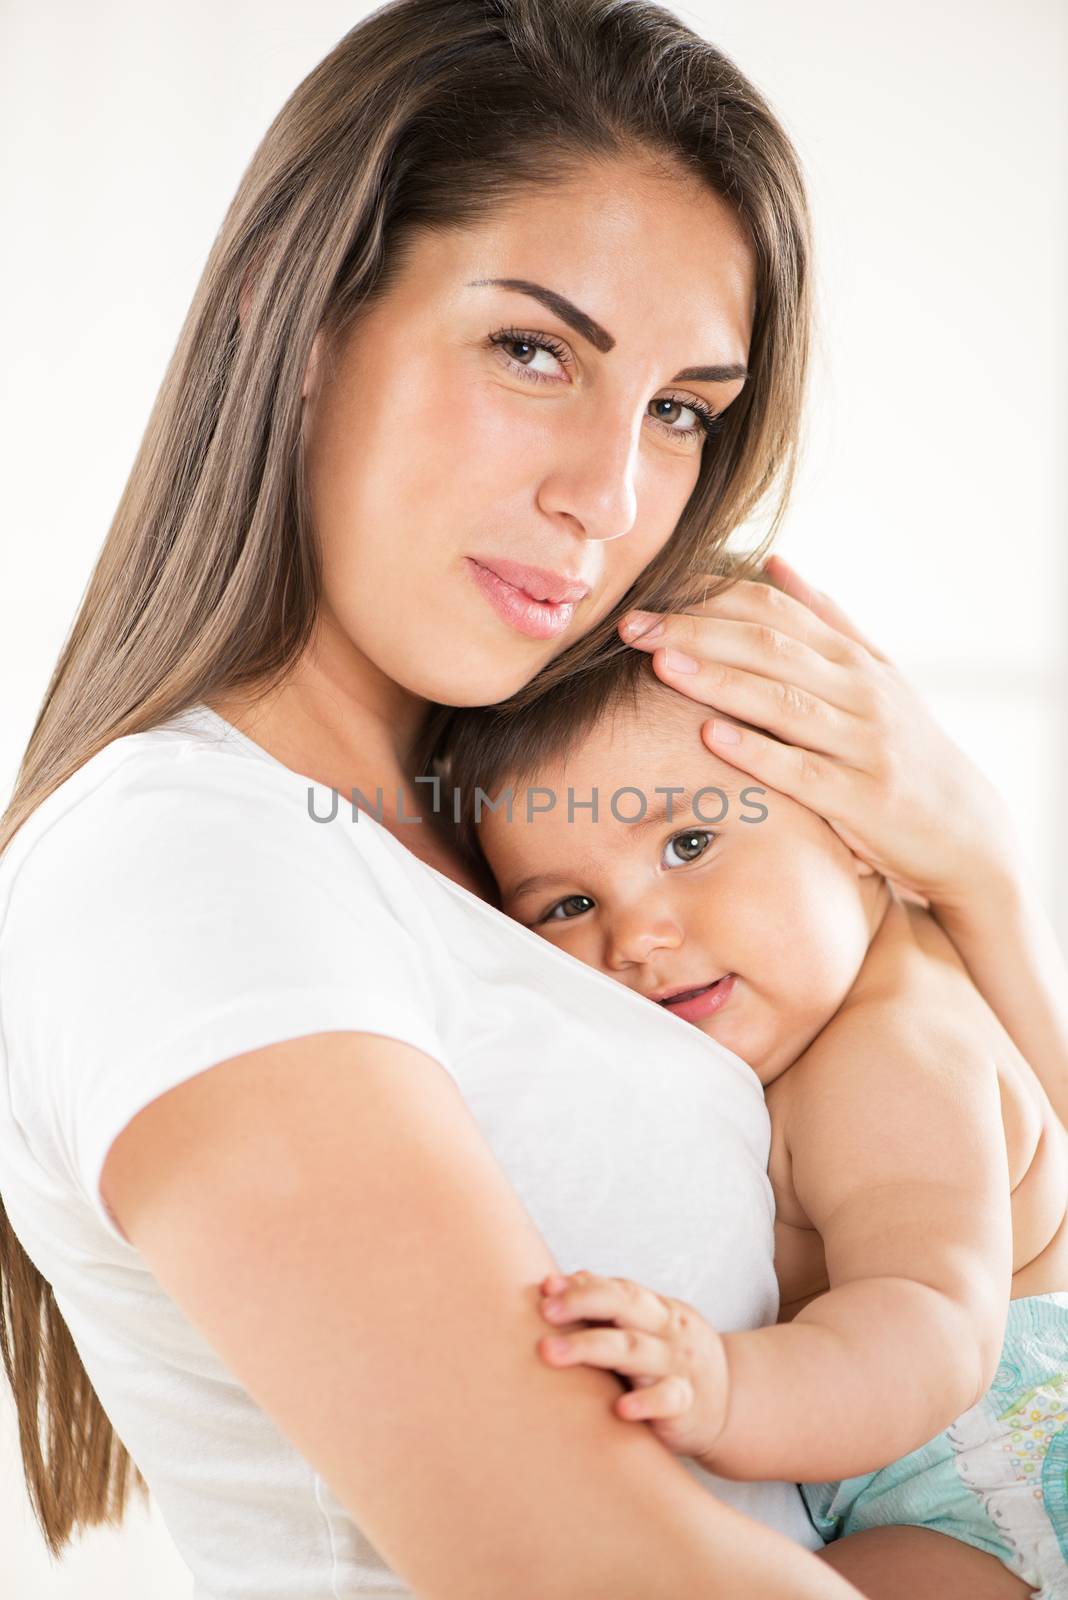 Beautiful Mother holding her baby boy. Looking at camera.